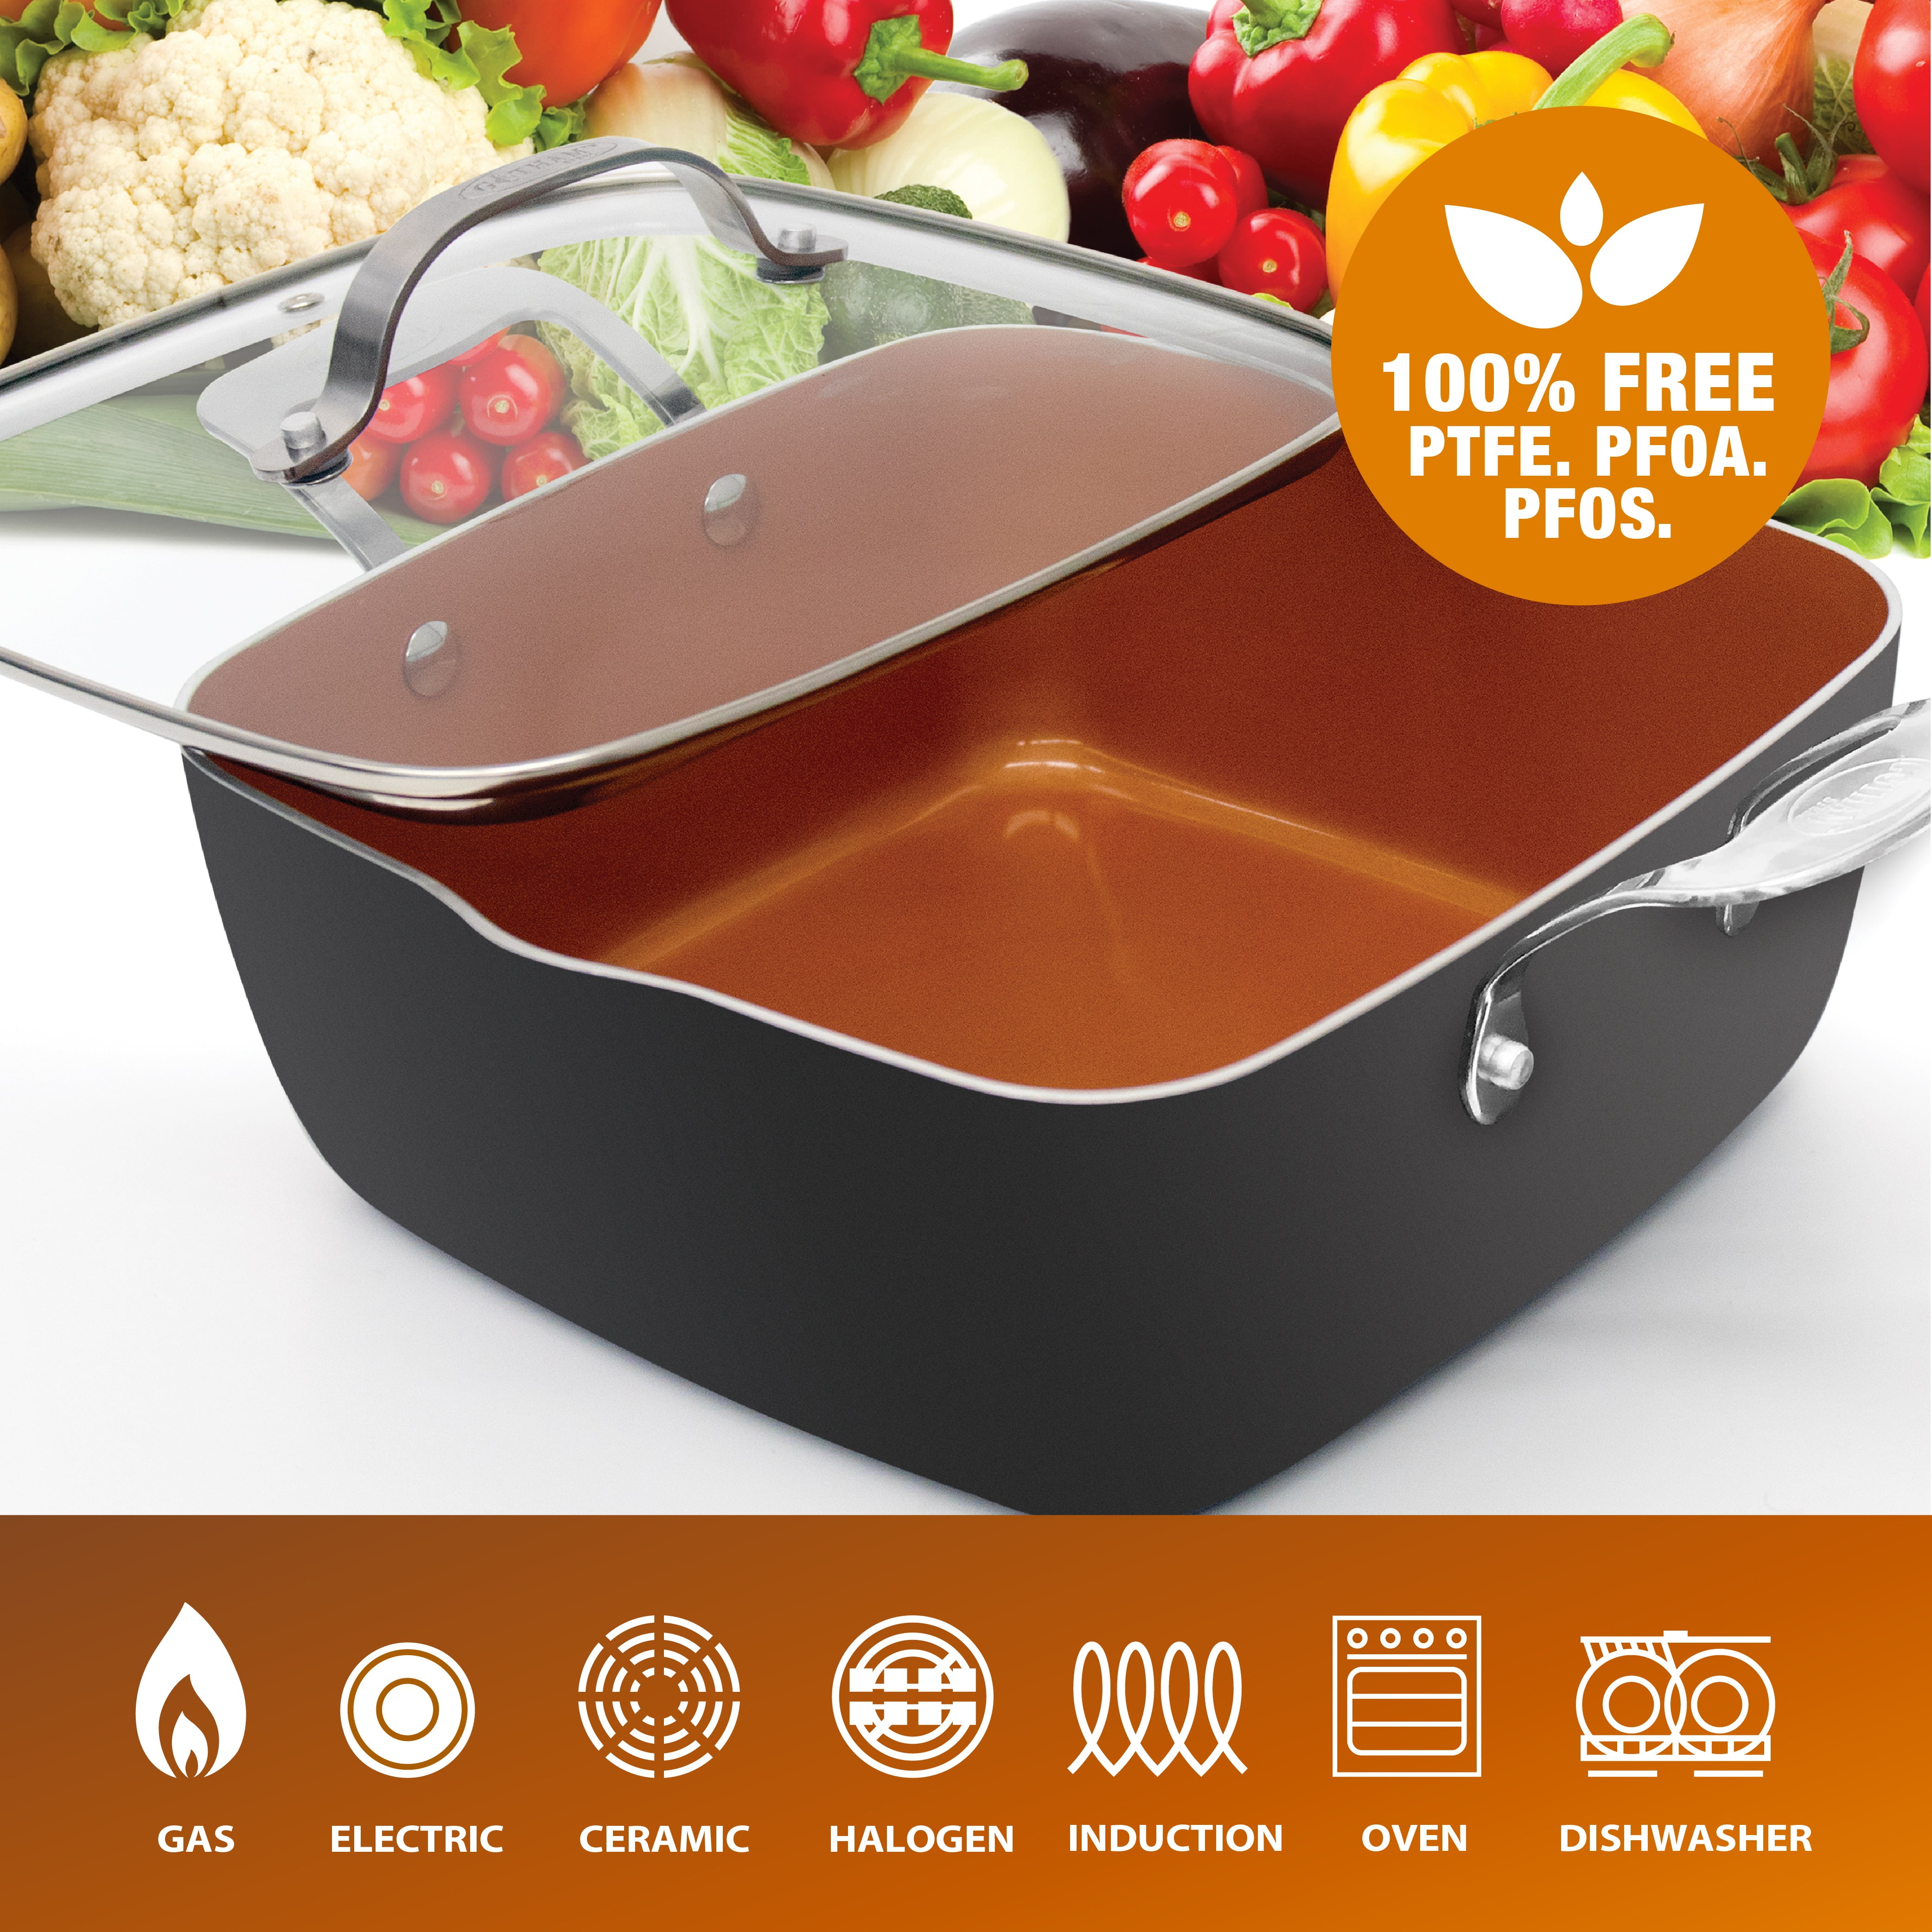 Gotham Steel gotham steel titanium ceramic 9.5? non-stick copper deep  square frying & cooking pan with lid, frying basket, steamer tray, 4